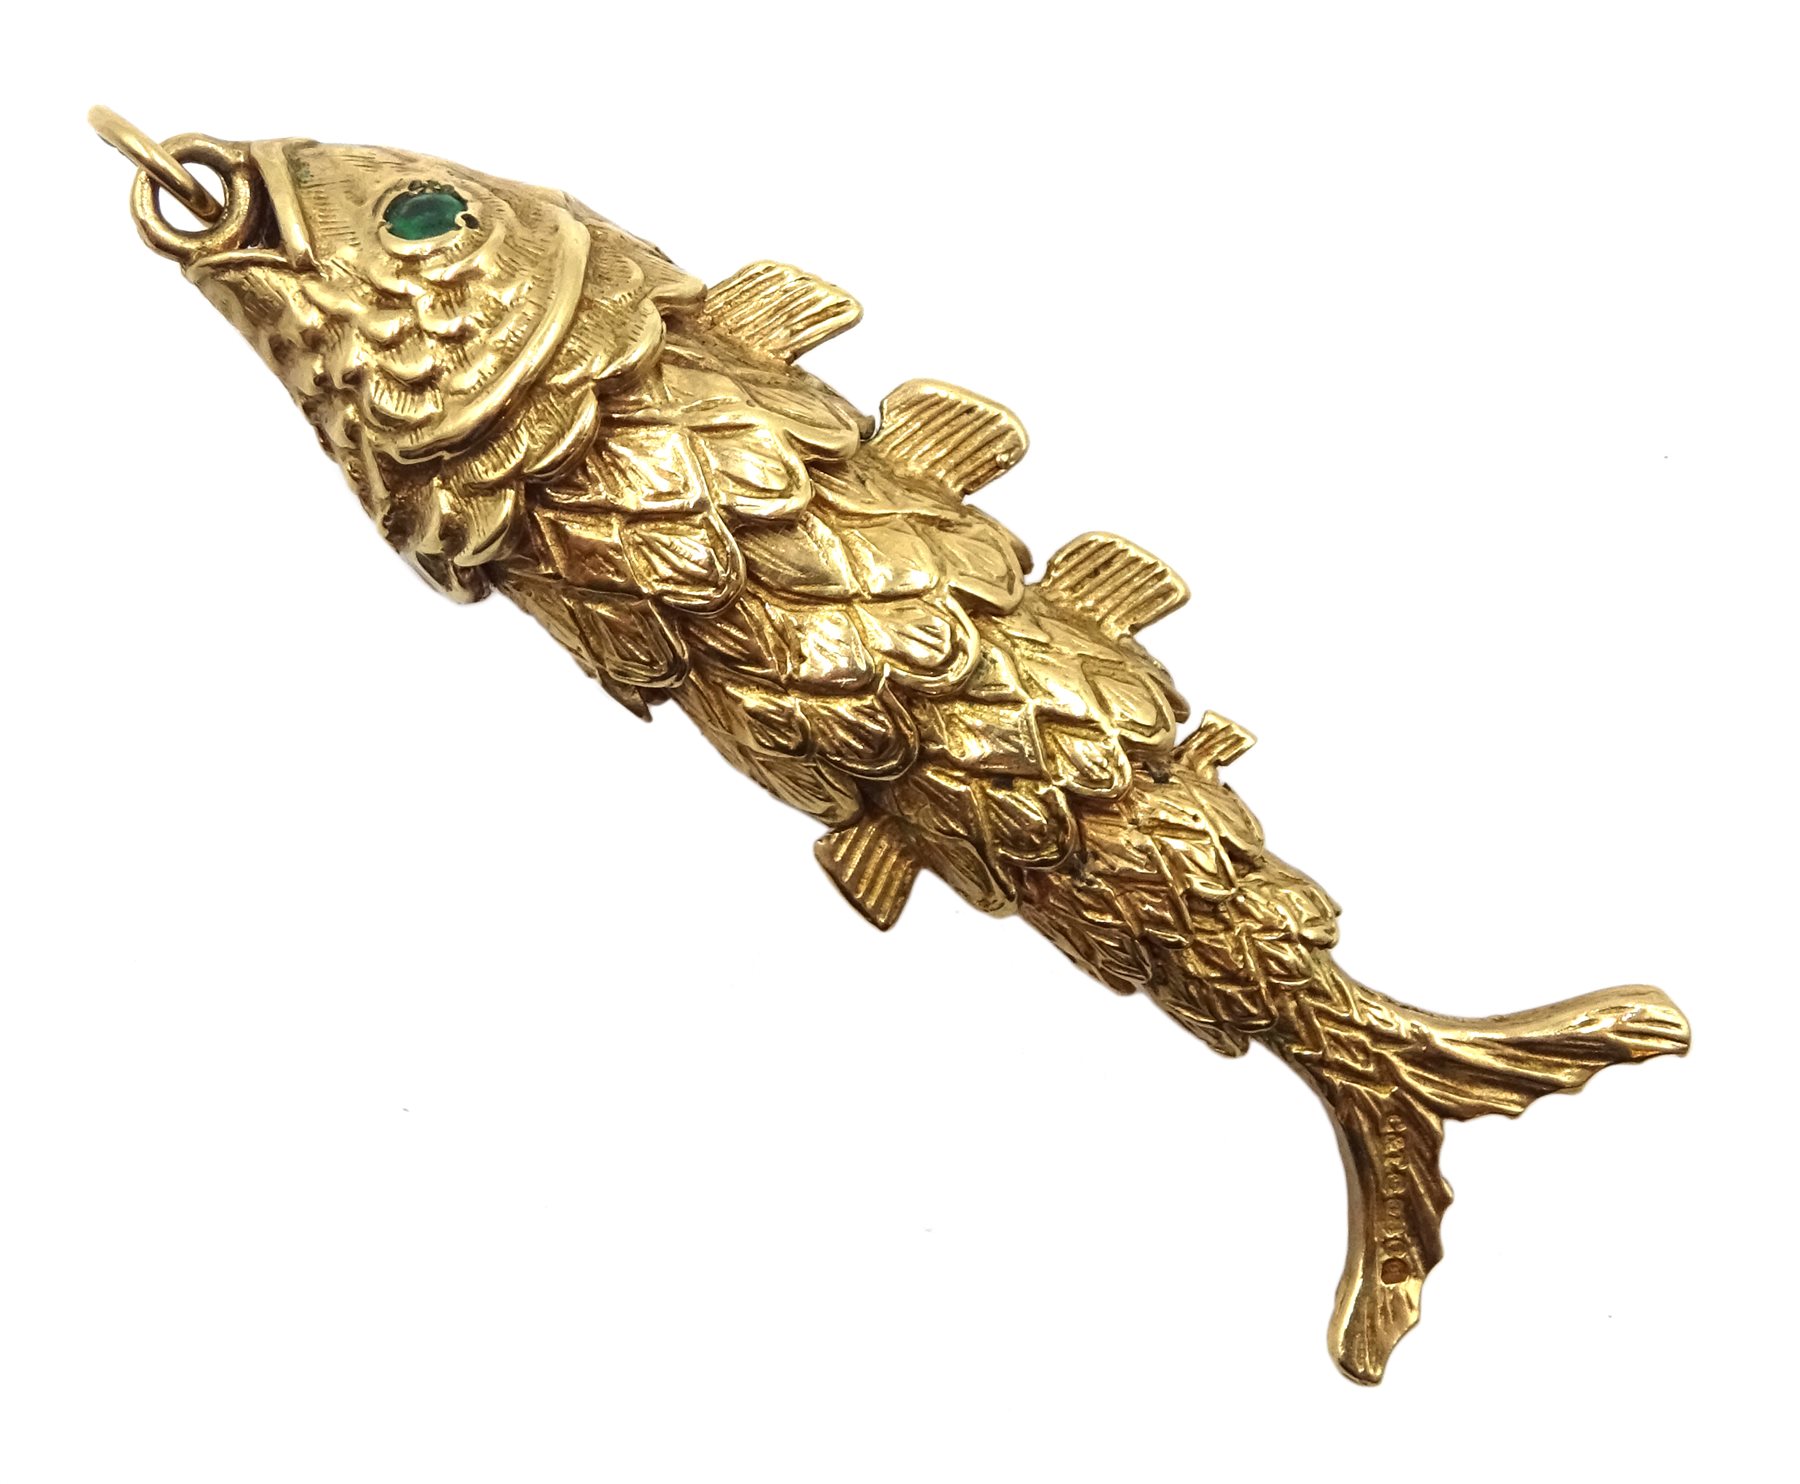 9ct gold articulated fish pendant, hallmarked - Jewellery, Watches & Silver